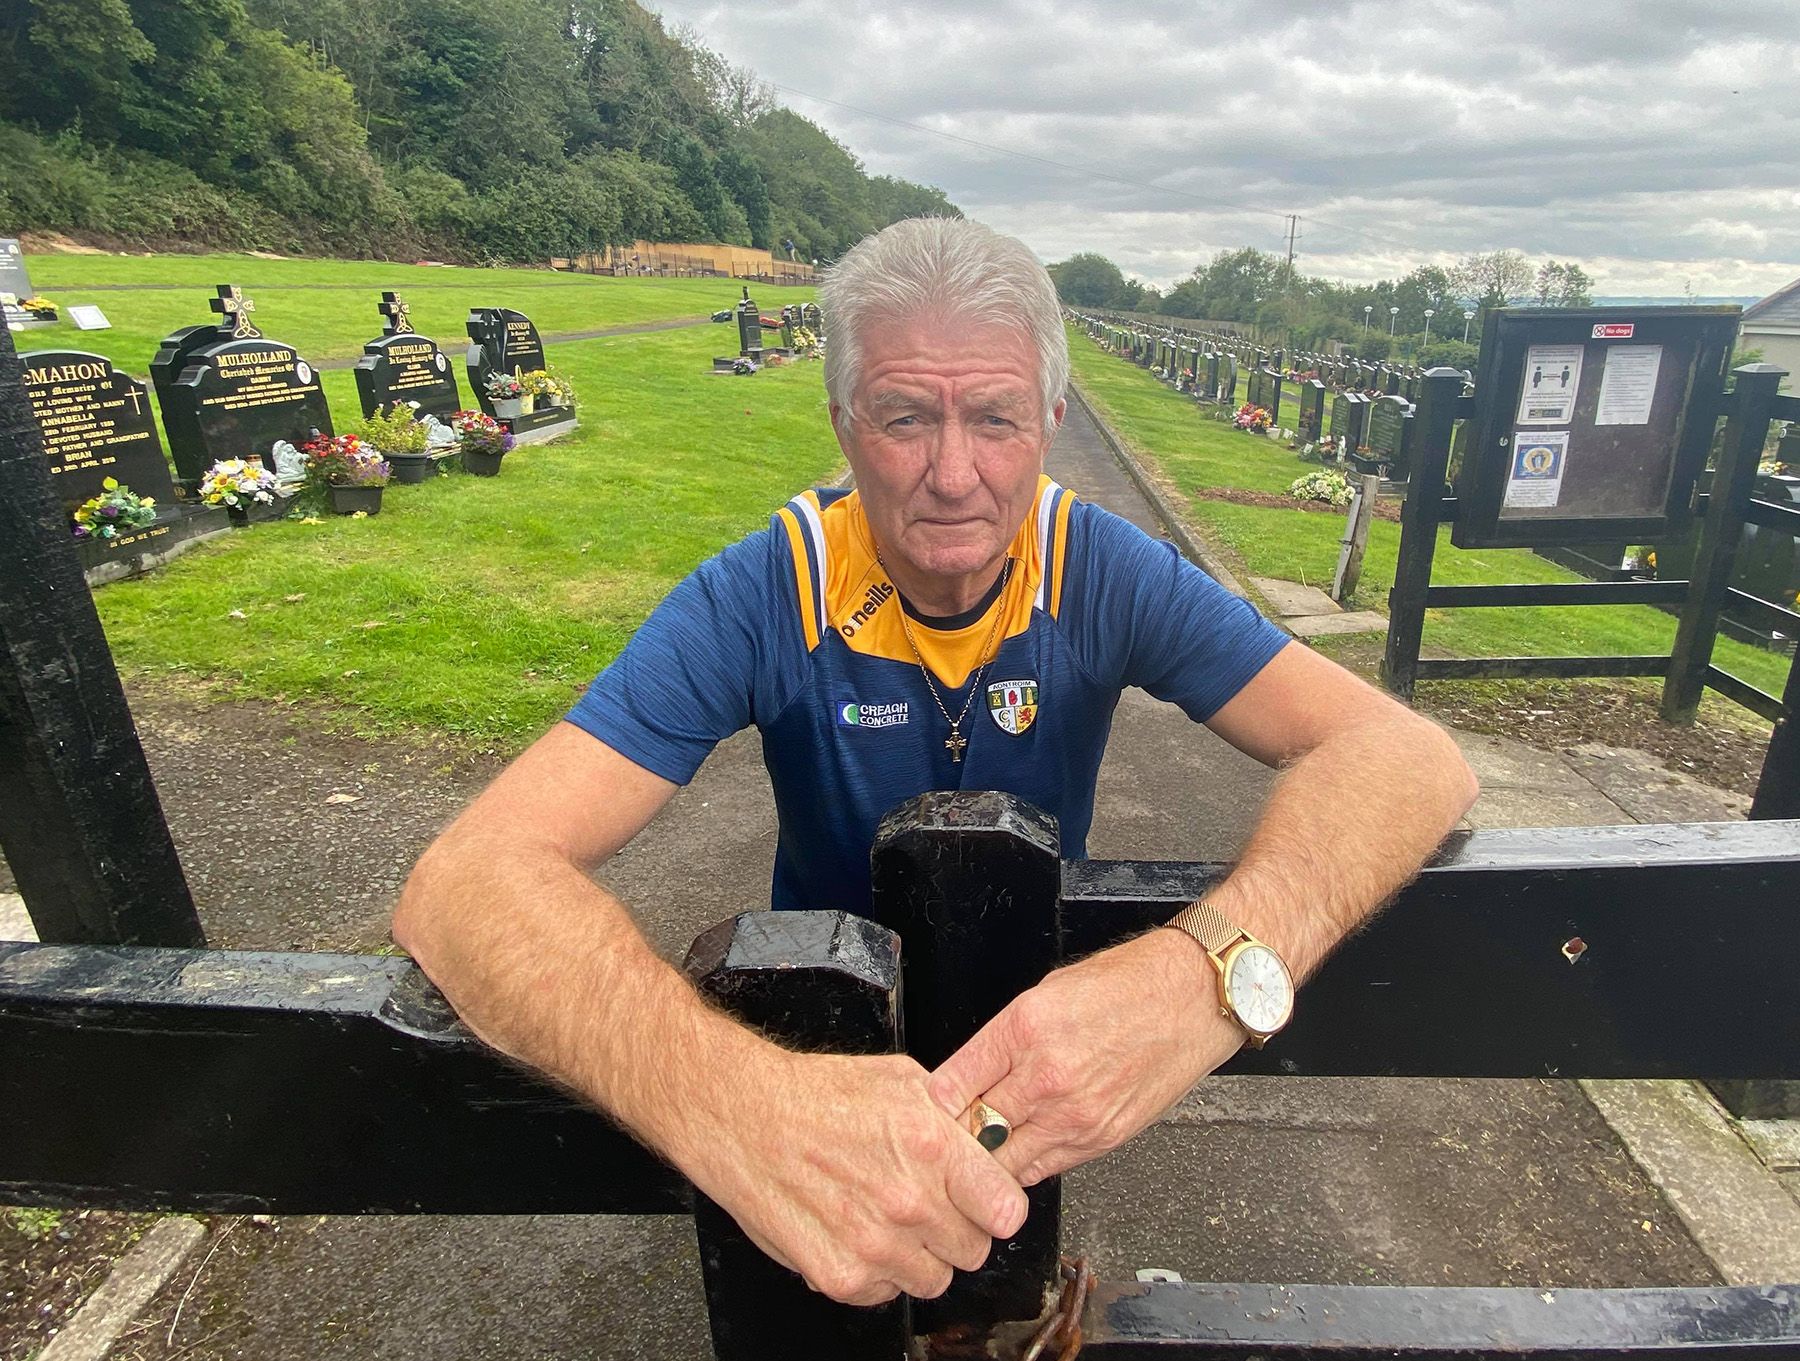 MAINTENANCE ISSUES: Michael Clarke at St Joseph’s Cemetery in Hannahstown where his grandson is buried